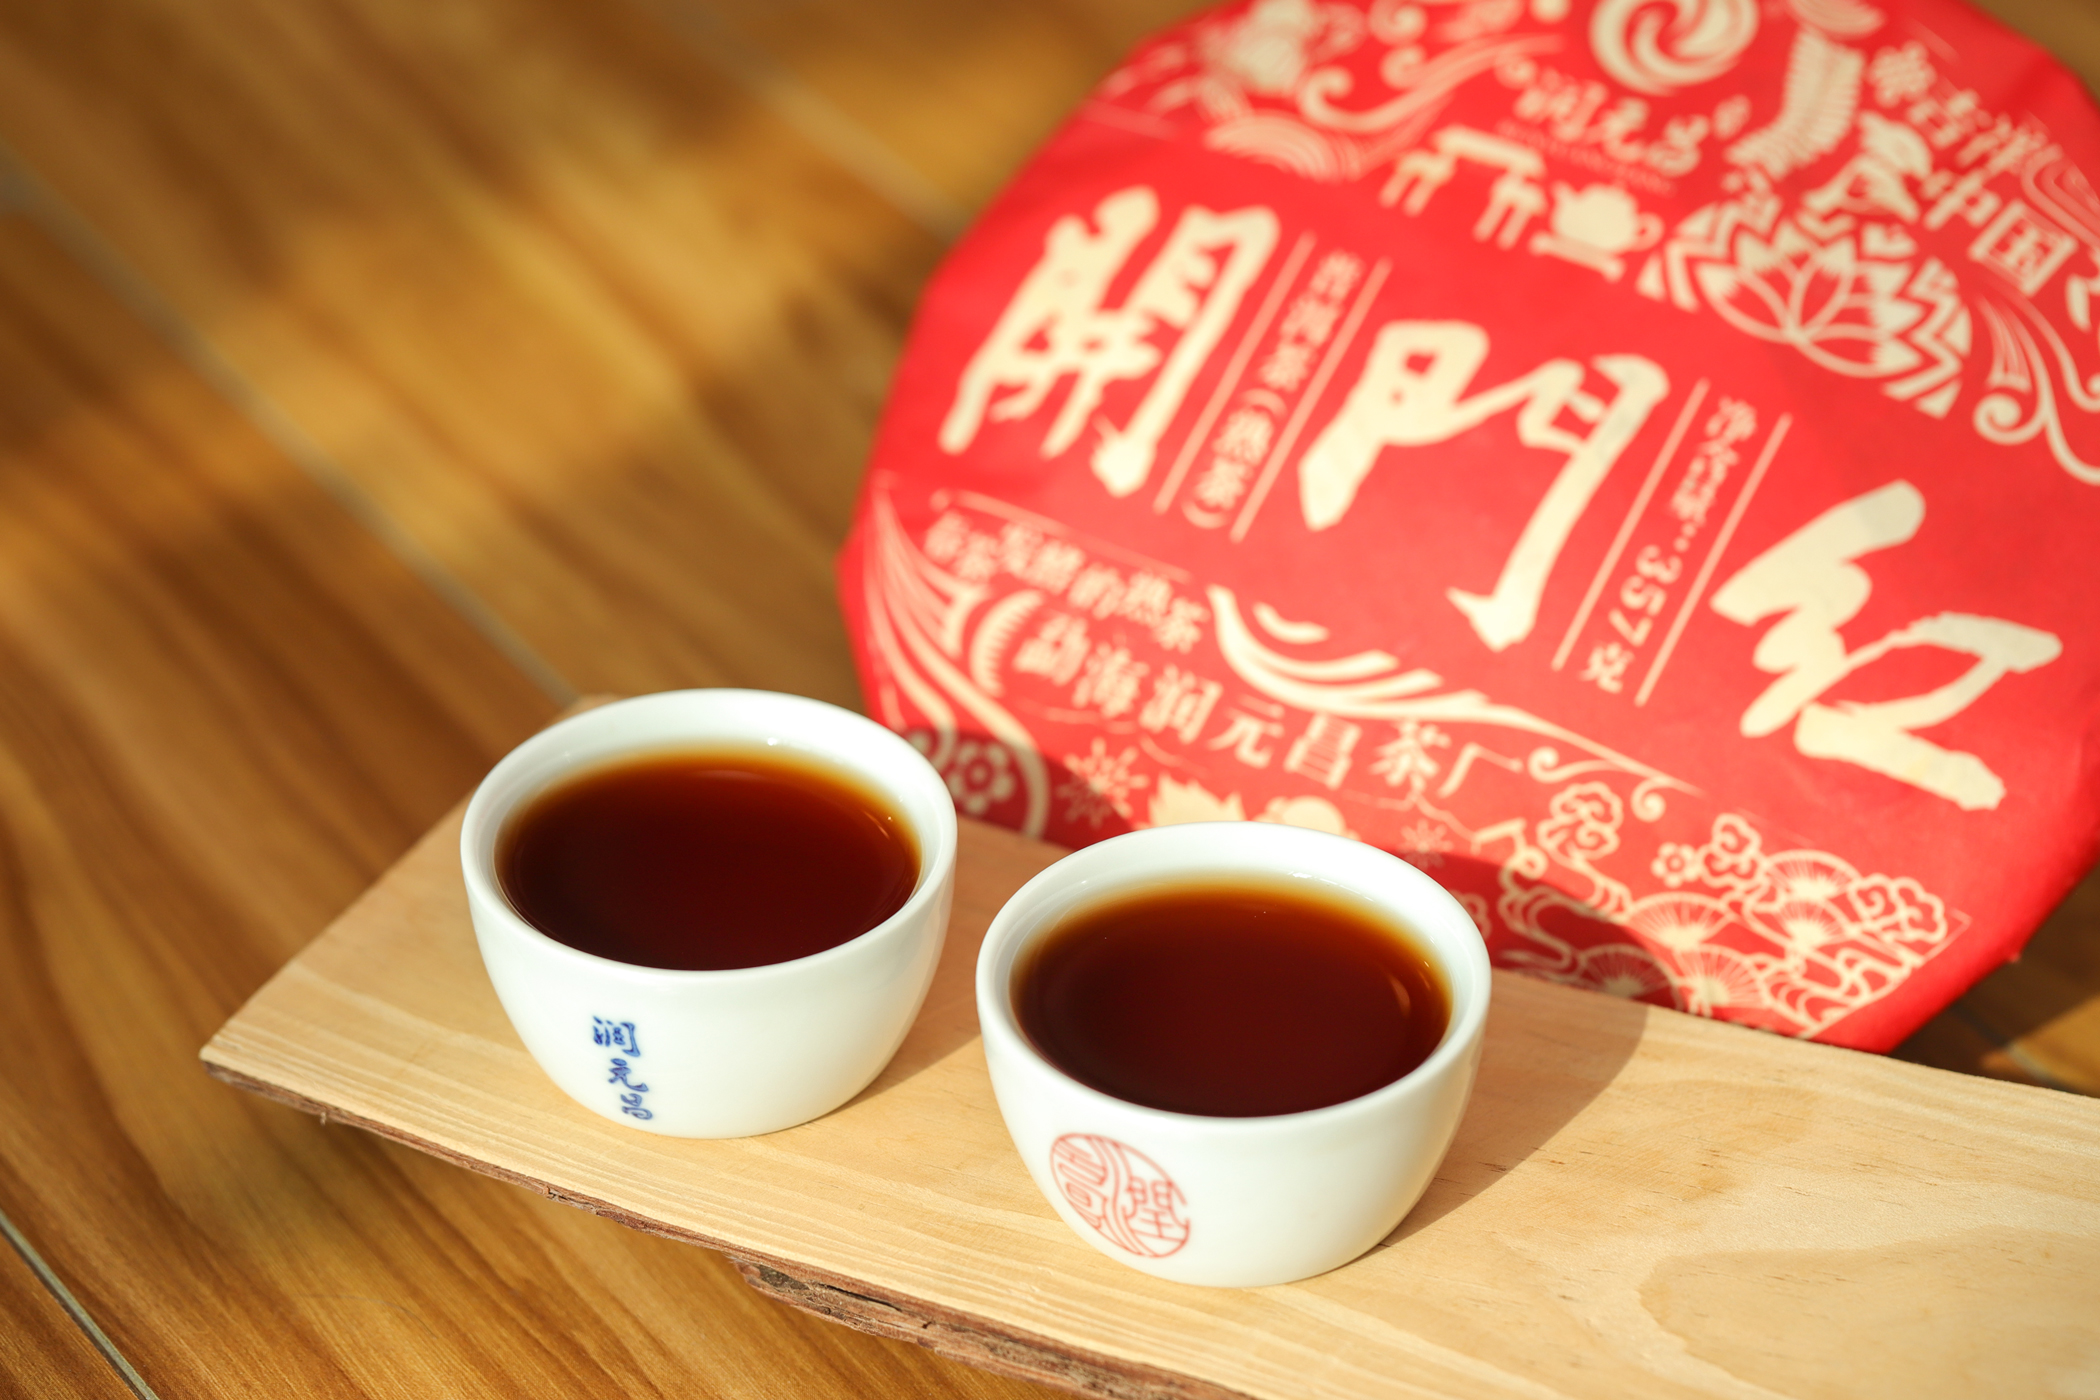  Efficacy, side effects and taboos of Pu'er tea